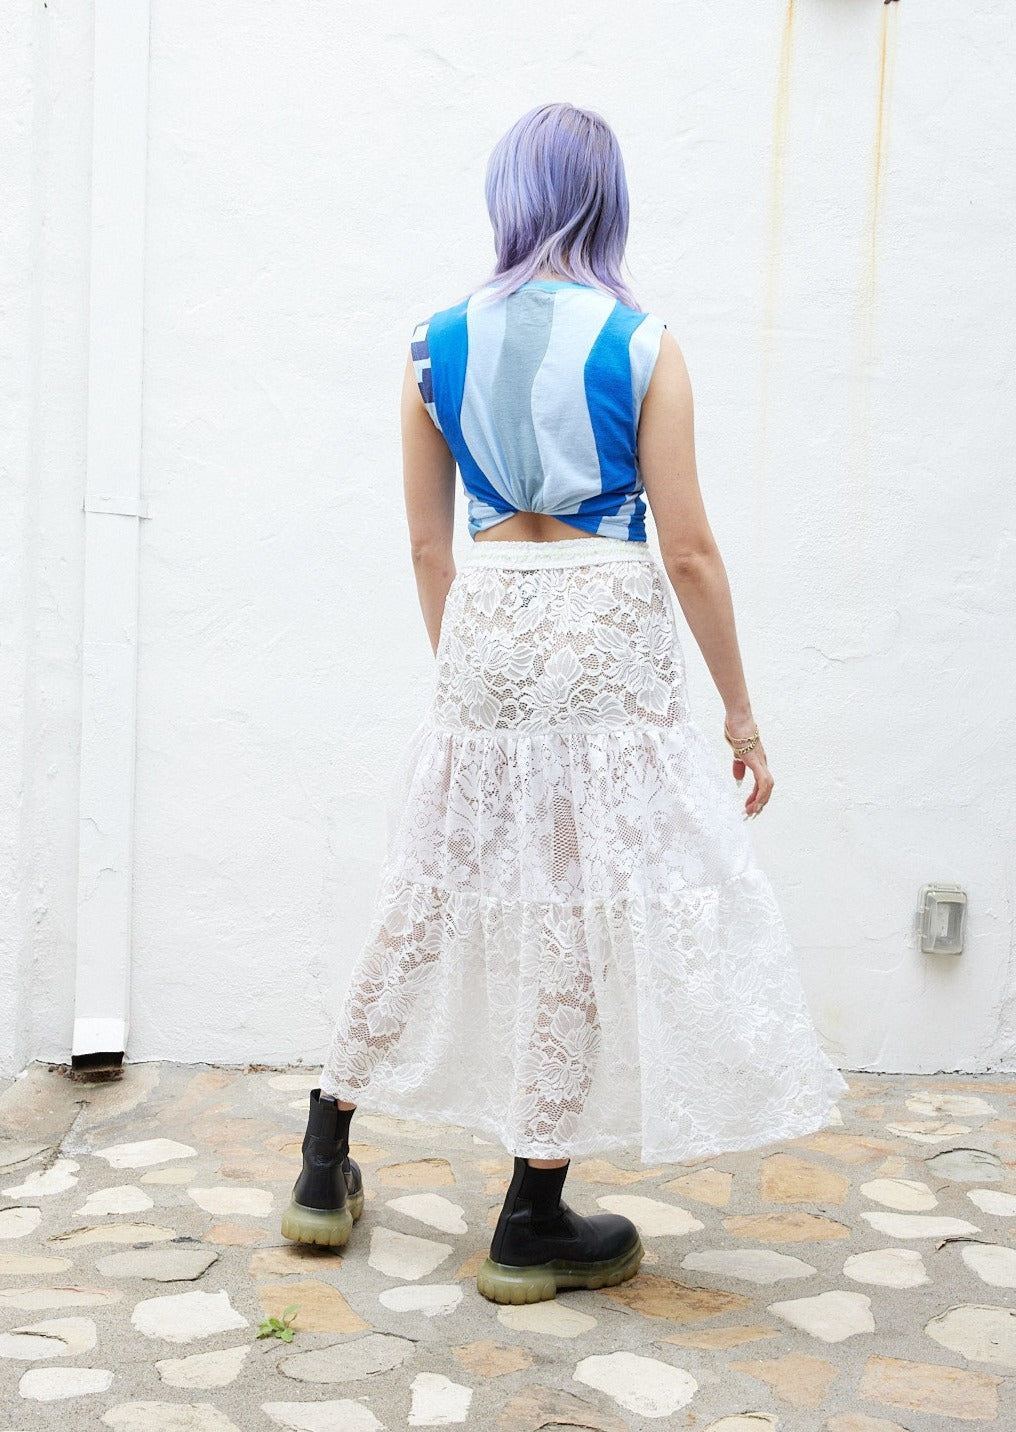 The Lace Skirt